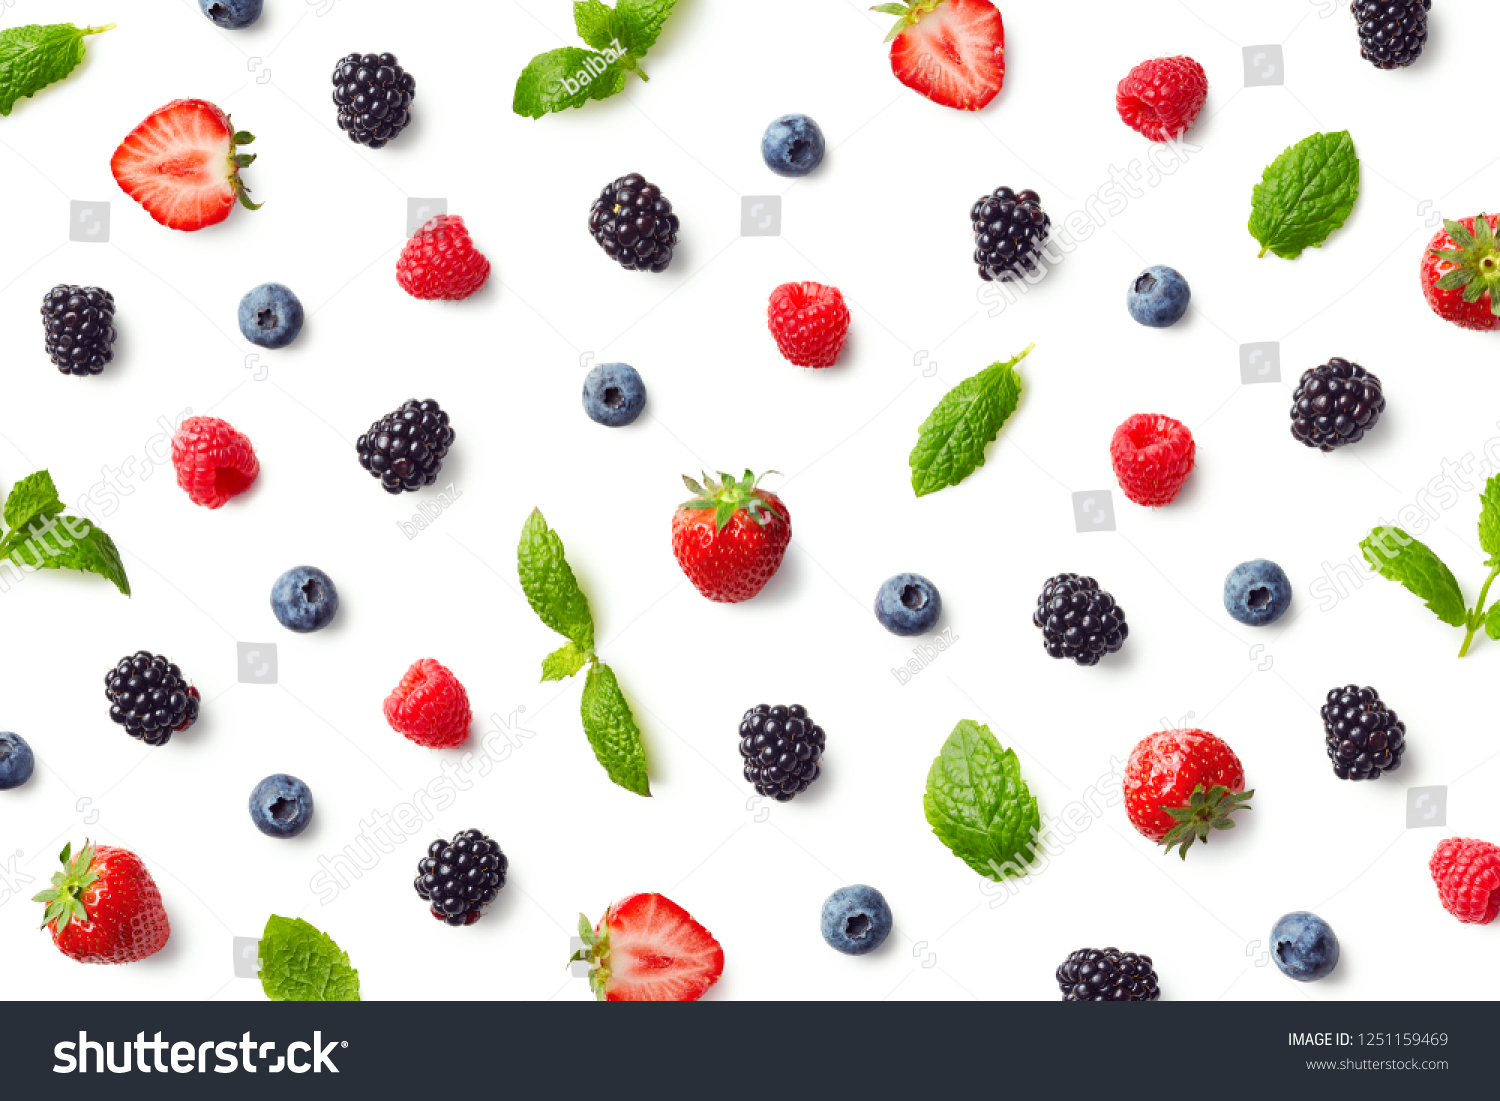 Fruit pattern of colorful berries and mint leaves isolated on white background. Top view. Flat lay #1251159469